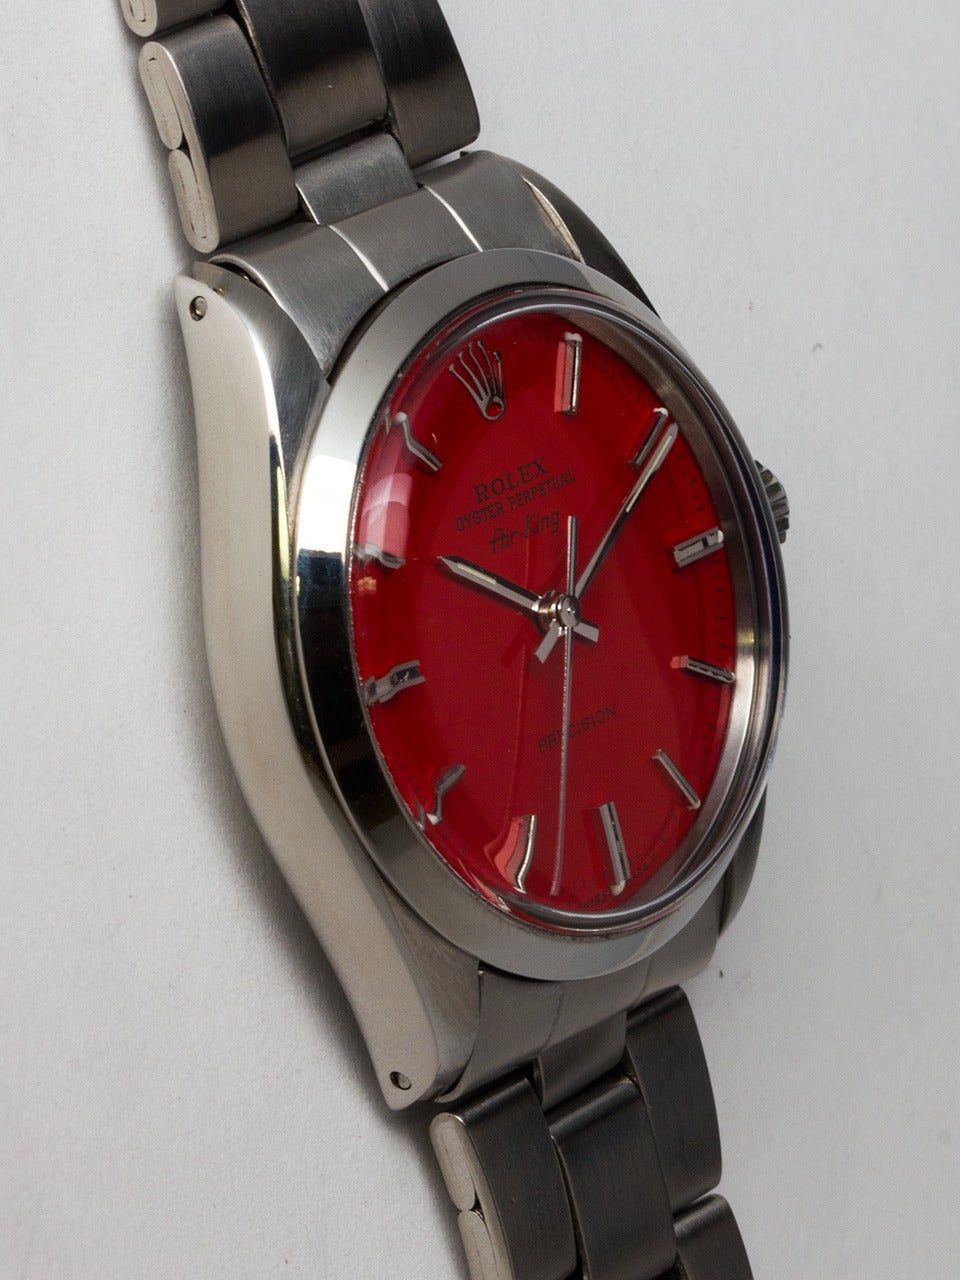 Rolex Stainless Steel Oyster Perpetual Airking Wristwatch, ref 5500 serial number R9 circa 1987. 34mm diameter case with smooth bezel and acrylic crystal. With custom colored Tomato Red dial with applied silver indexes and silvered baton hands.